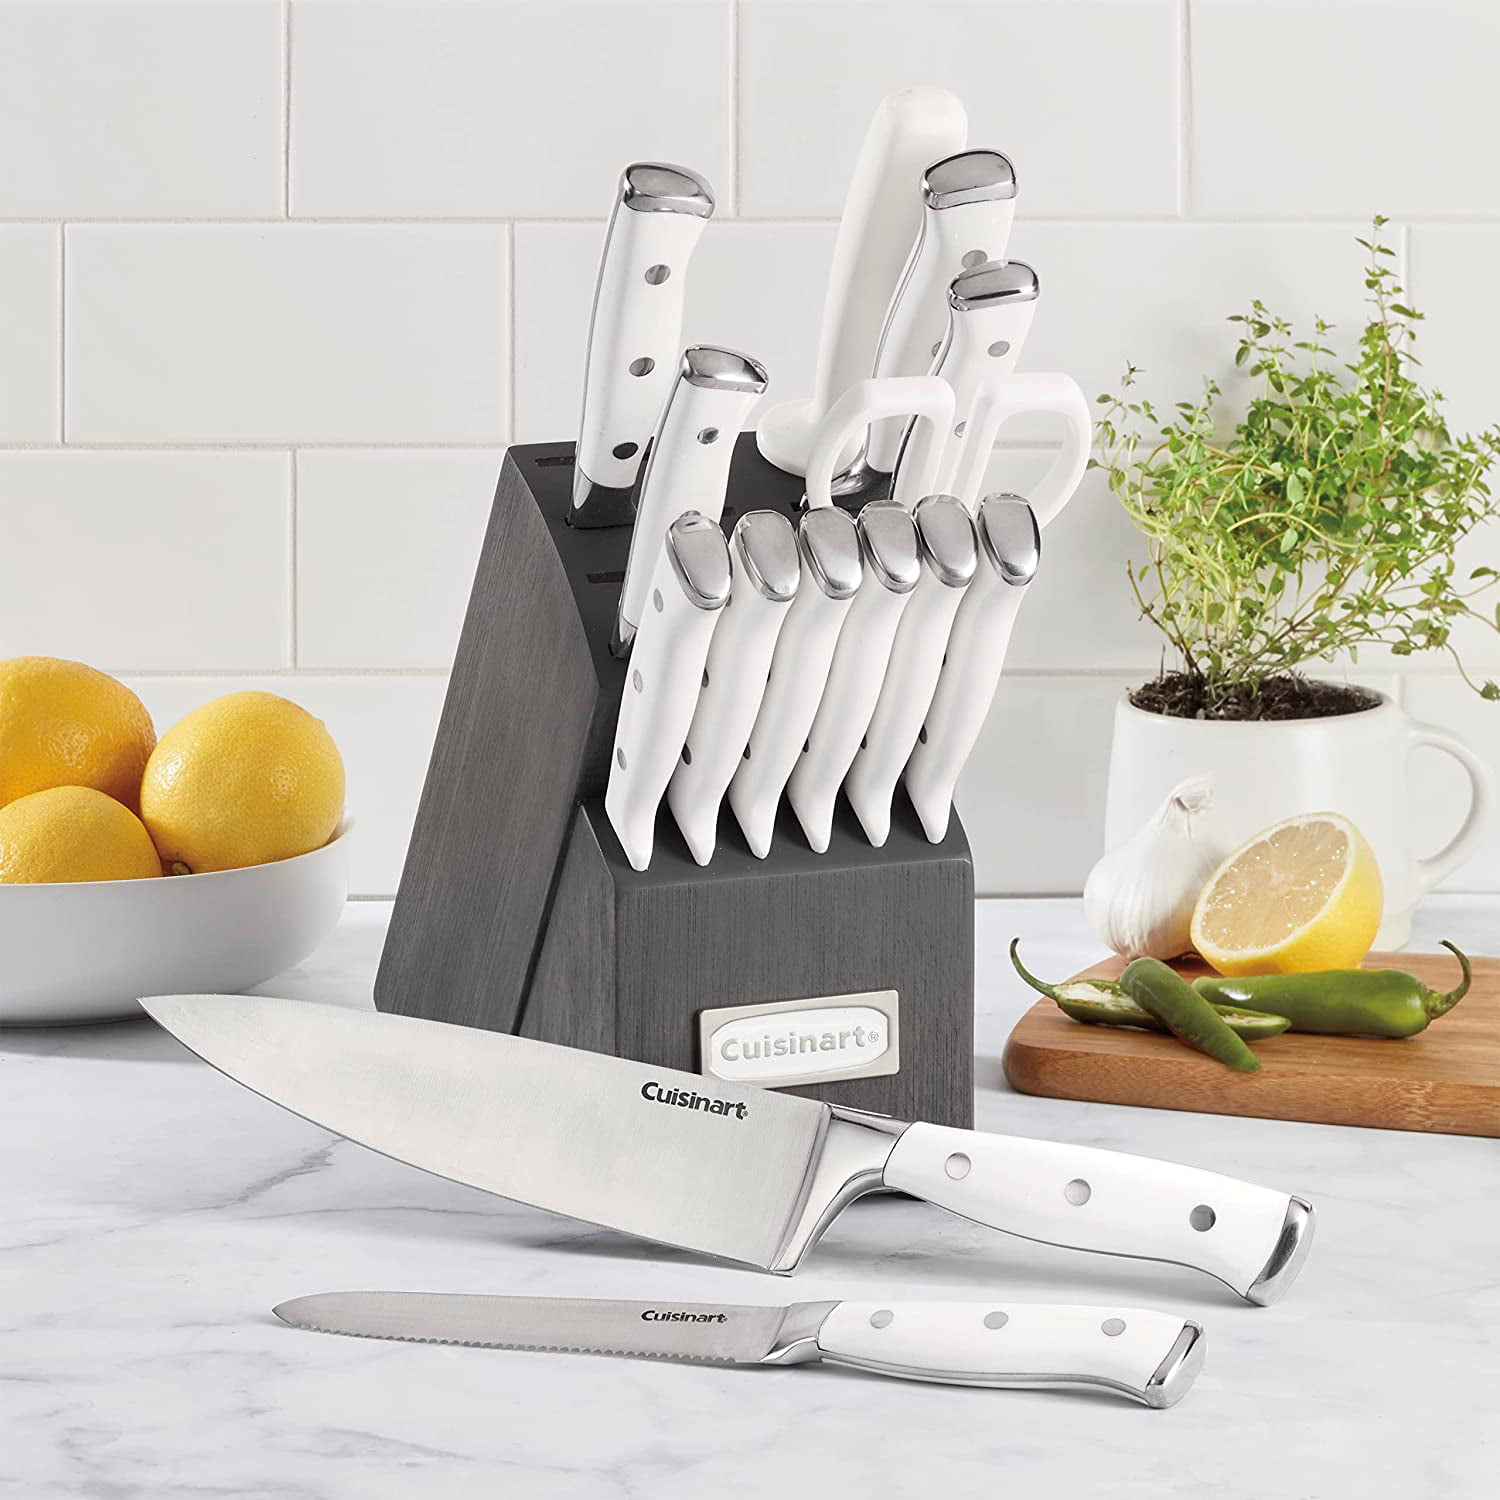 Cuisinart Classic Forged Triple Rivet 15-Piece Cutlery Set with Block,  White and Stainless, C77WTR-15P